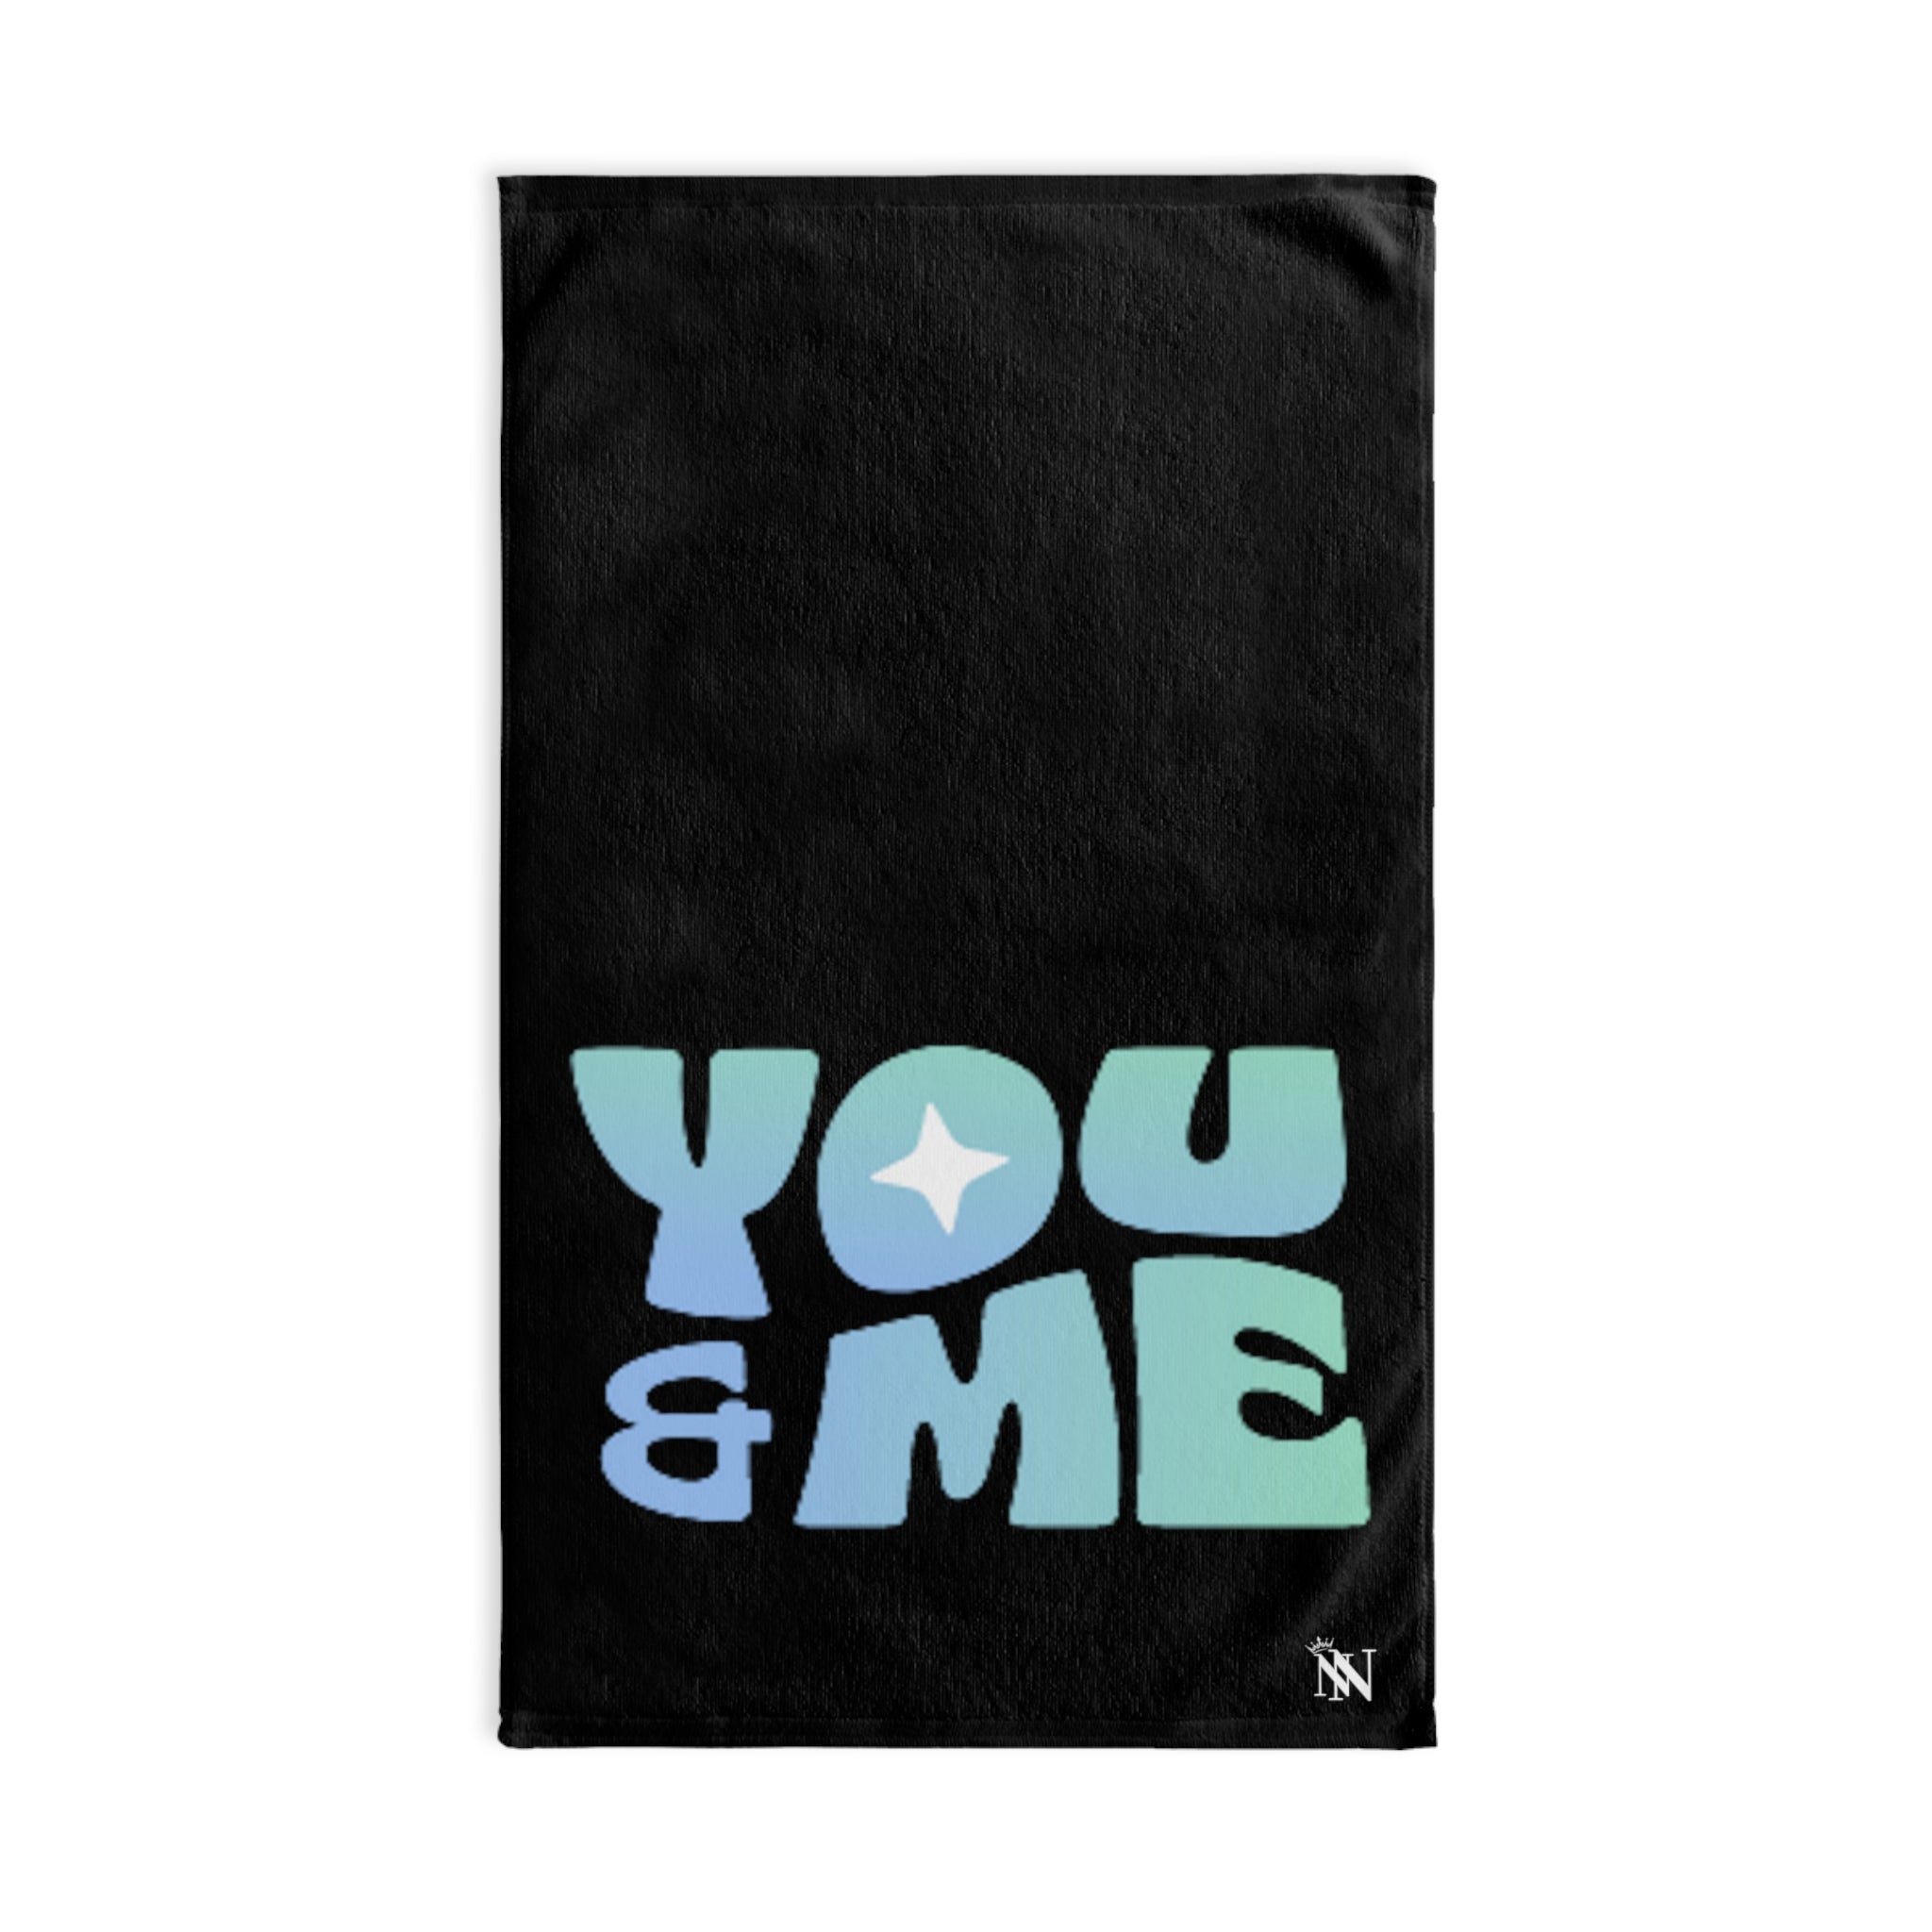 You Me Together Black | Sexy Gifts for Boyfriend, Funny Towel Romantic Gift for Wedding Couple Fiance First Year 2nd Anniversary Valentines, Party Gag Gifts, Joke Humor Cloth for Husband Men BF NECTAR NAPKINS